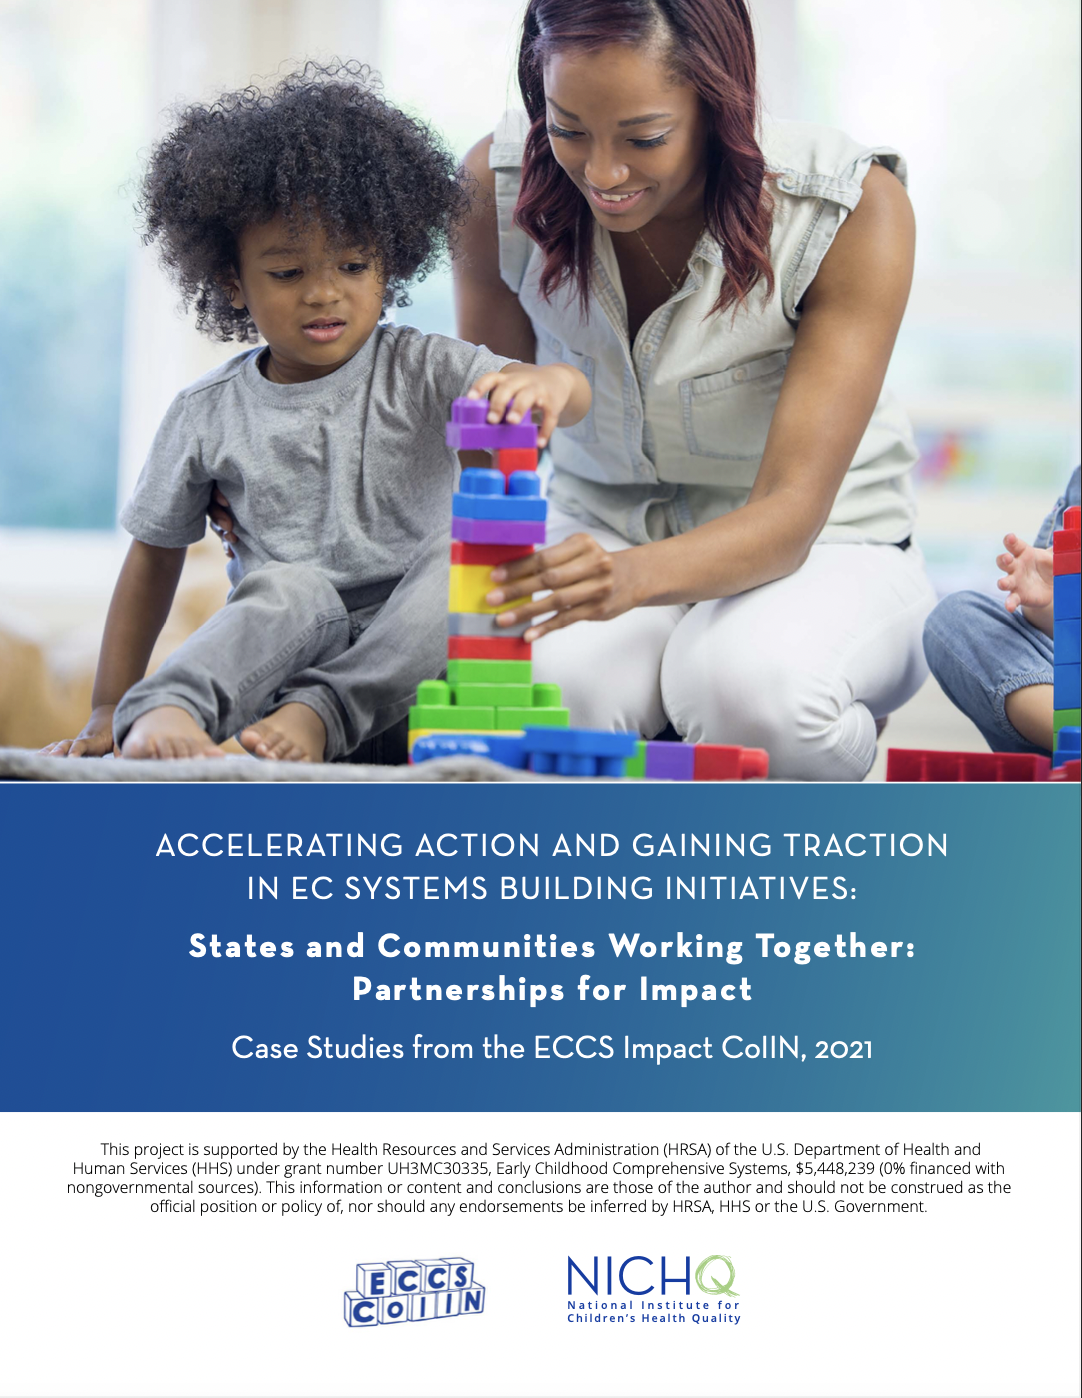 States and Communities Working Together: Partnerships for Impact